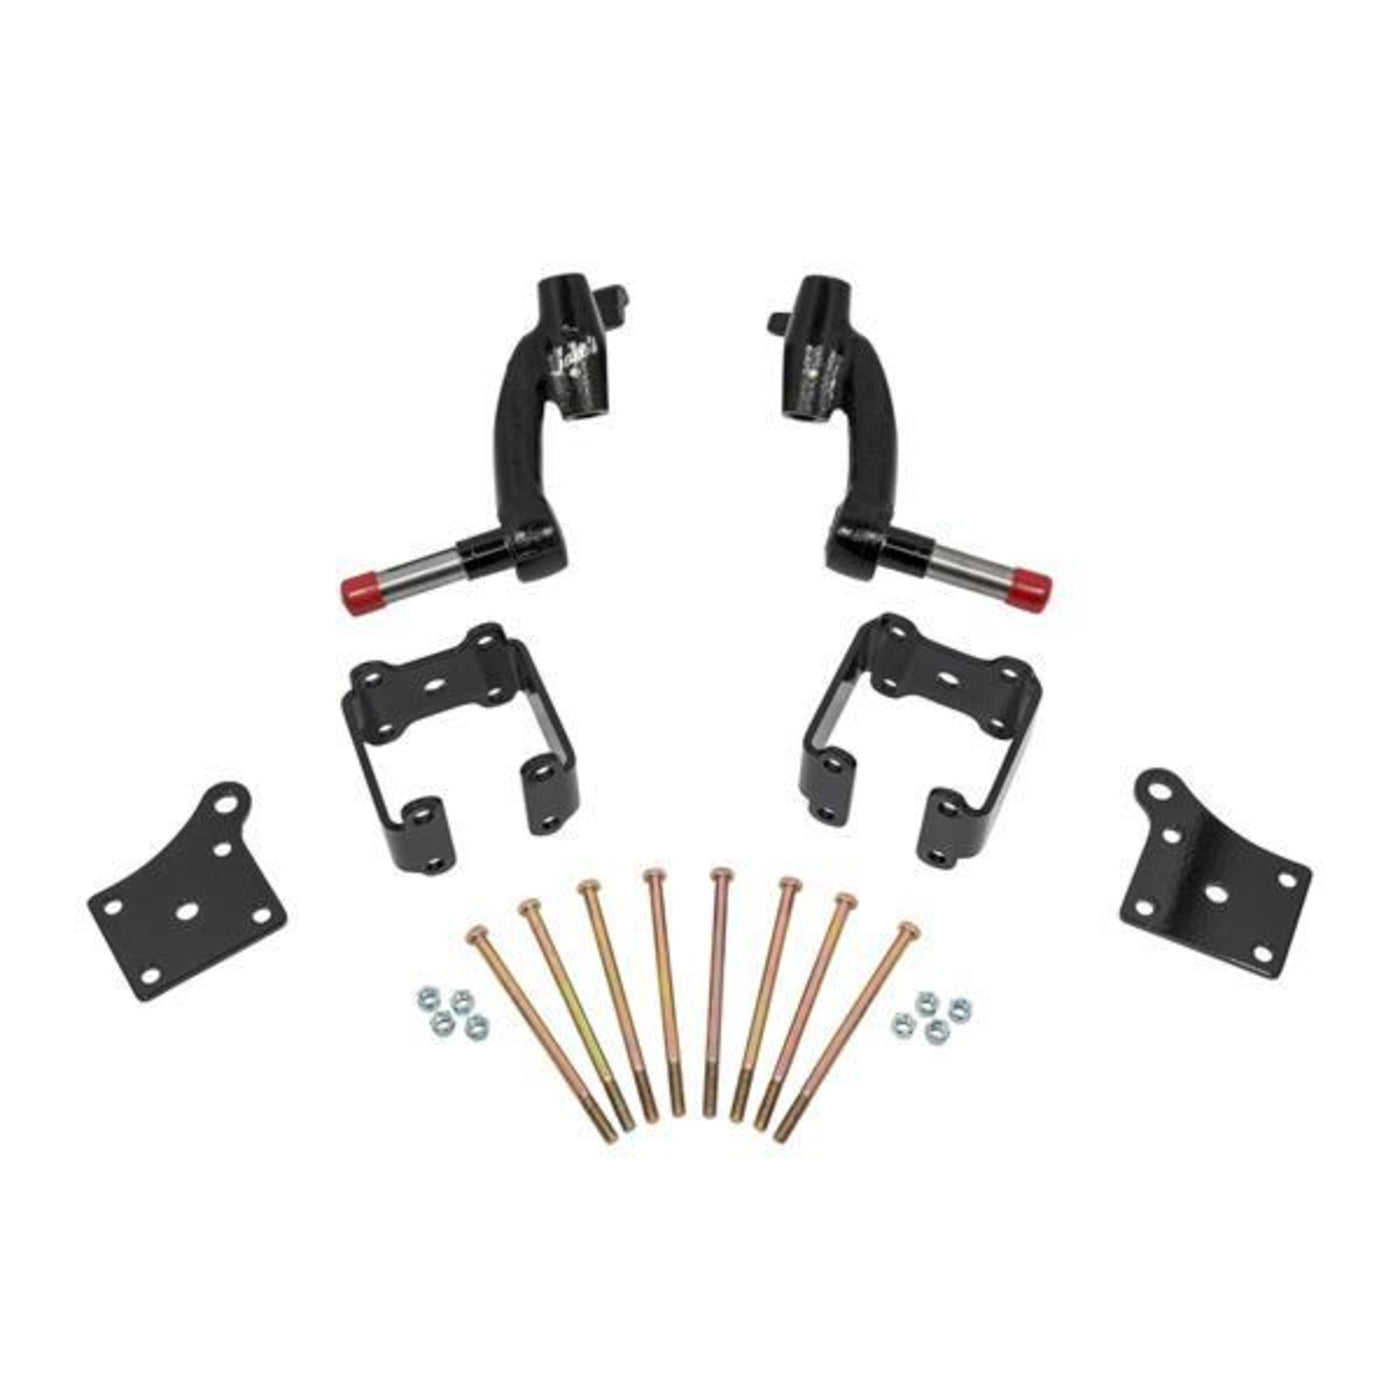 Jake's E-Z-GO TXT Electric 6" Spindle Lift Kit (Years 2013.5-Up)